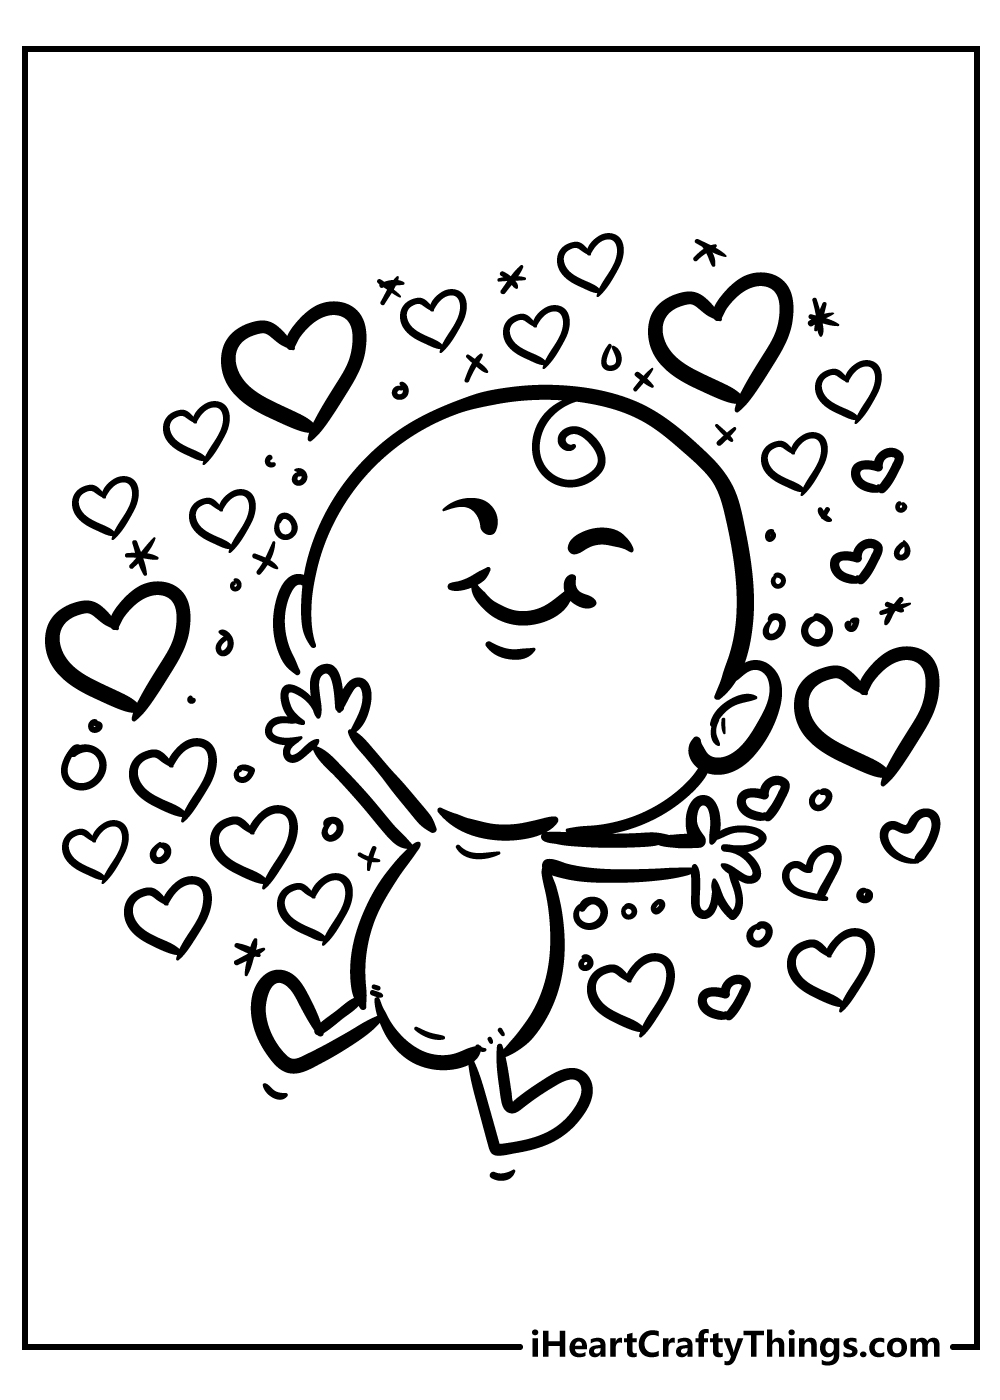 black-and-white heart coloring pages